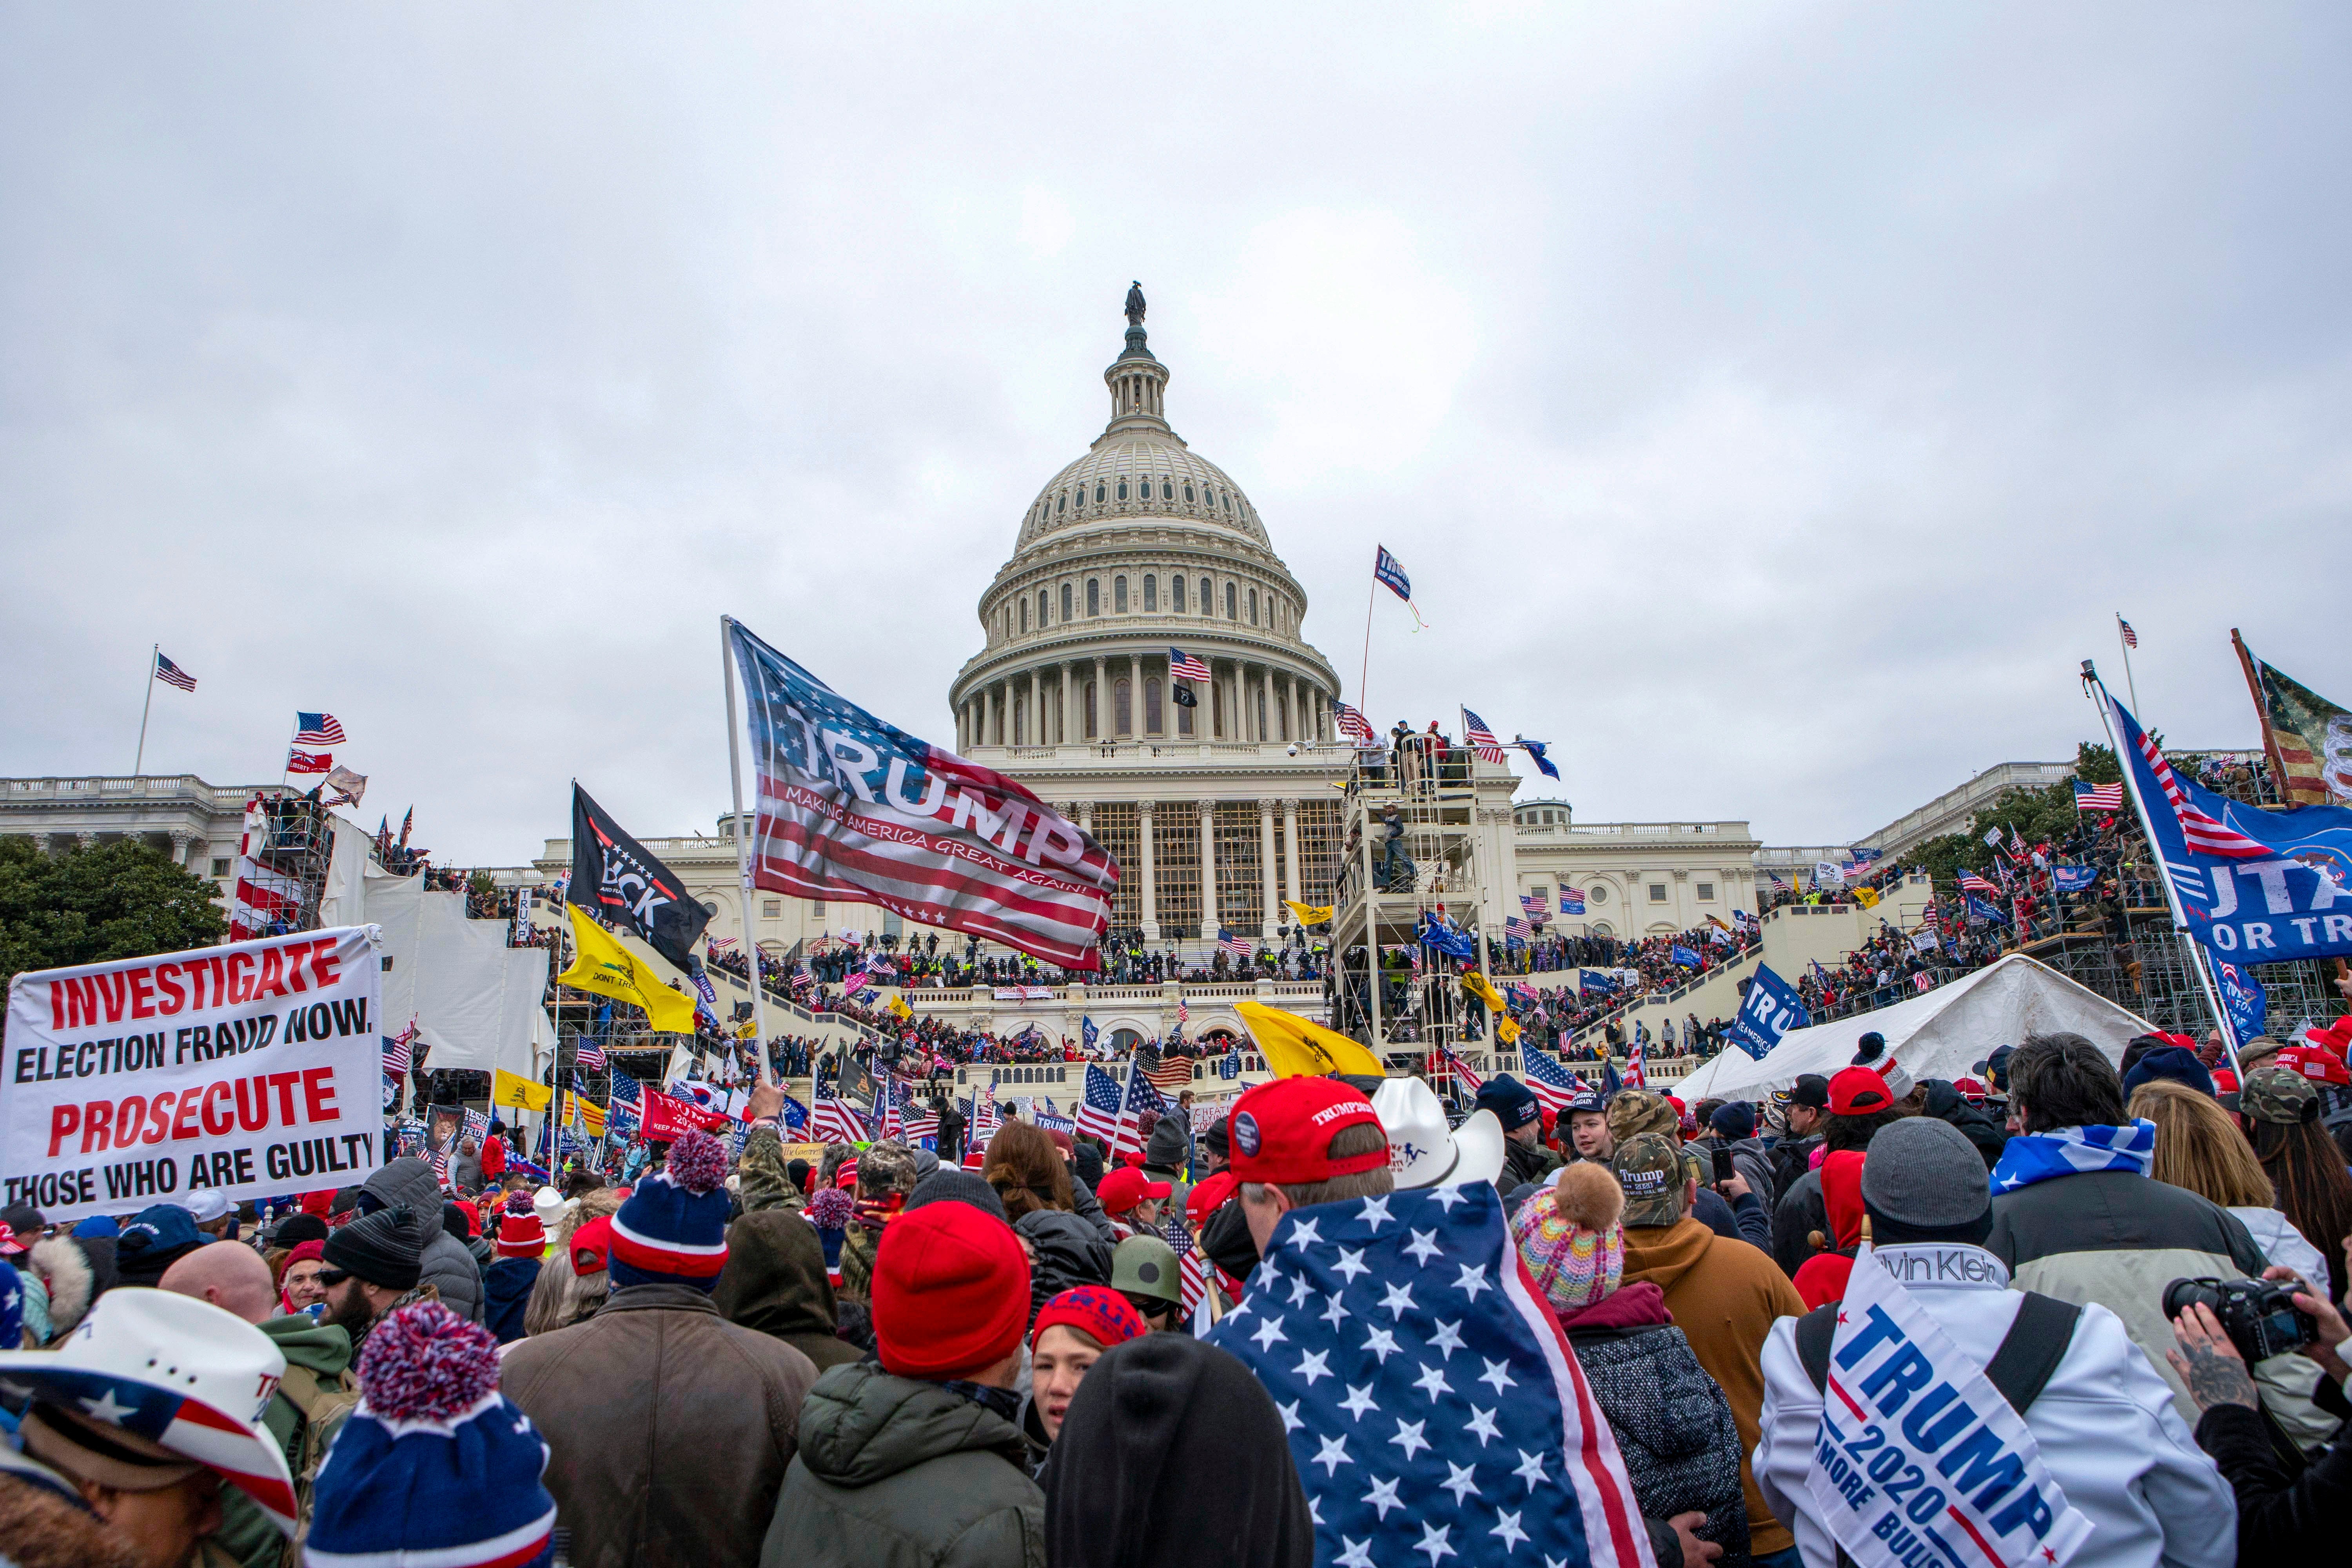 A mob fuelled by Donald Trump’s false claims that the 2020 election was stolen from him stormed the US Capitol on 6 January, 2021, to stop the certification of Joe Biden’s victory.